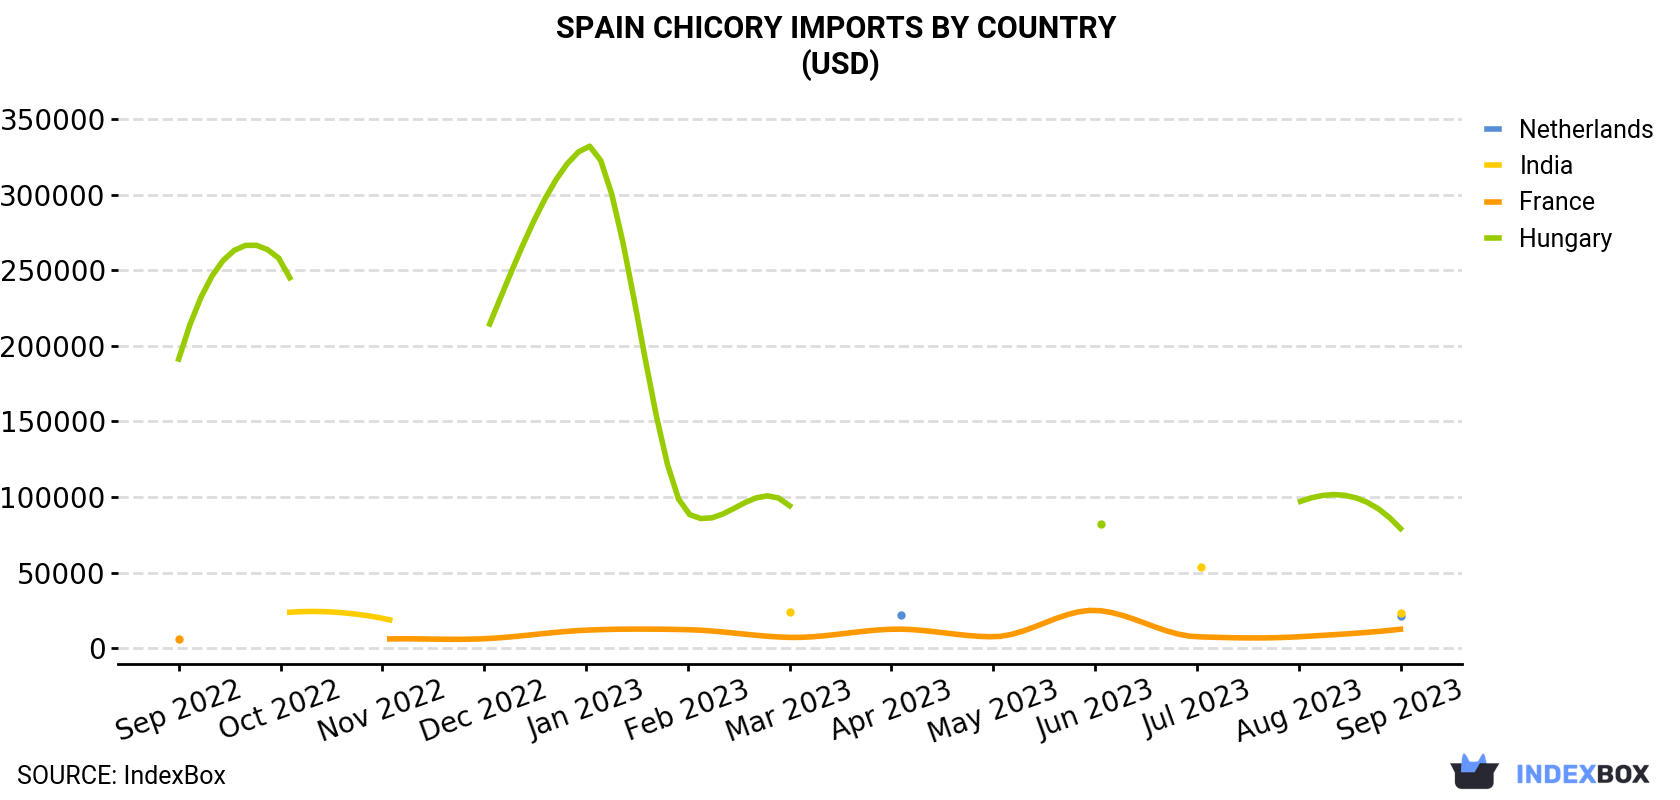 Spain Chicory Imports By Country (USD)